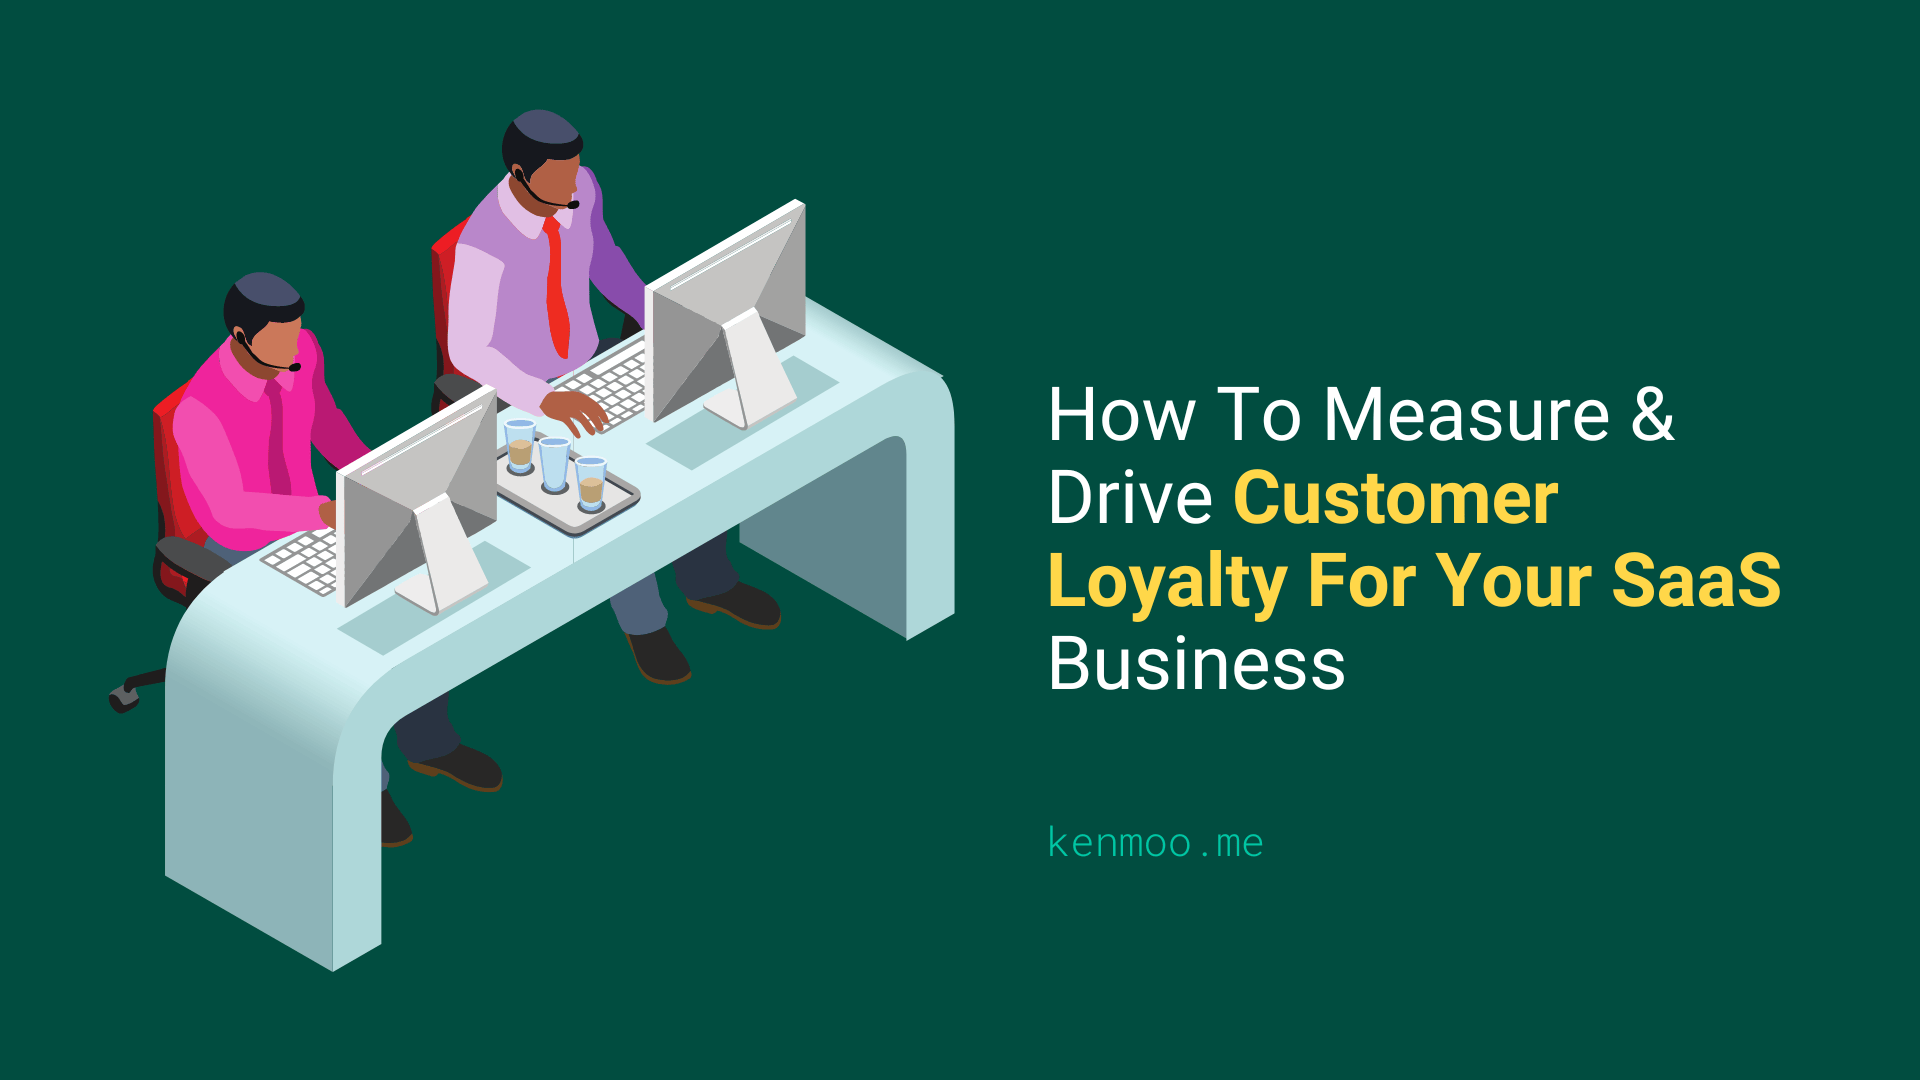 How To Measure & Drive Customer Loyalty For Your SaaS Business | kenmoo.me